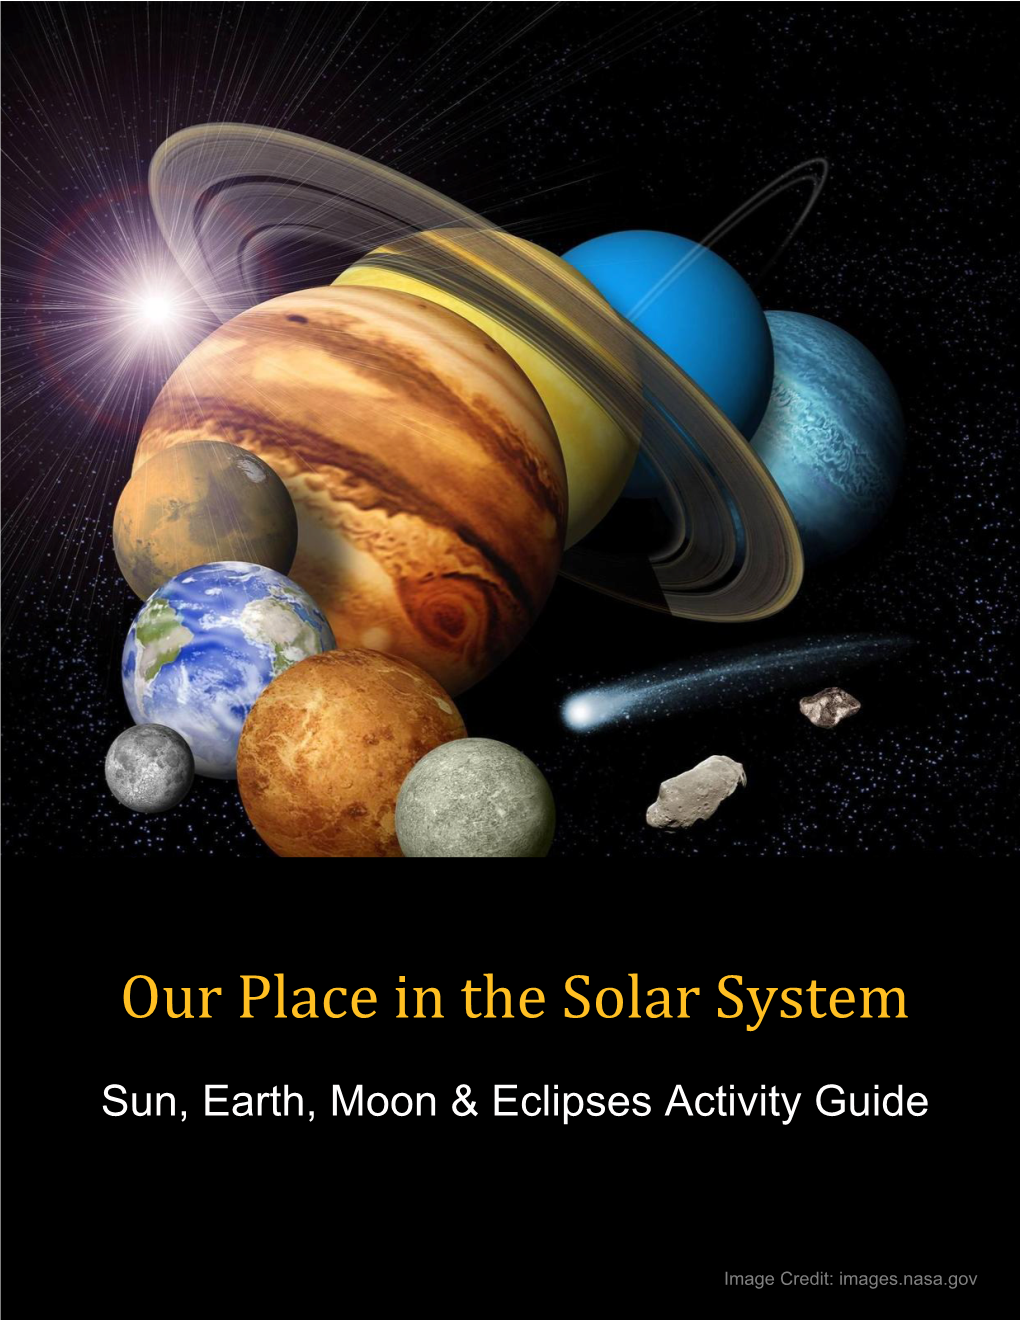 Our Place in the Solar System